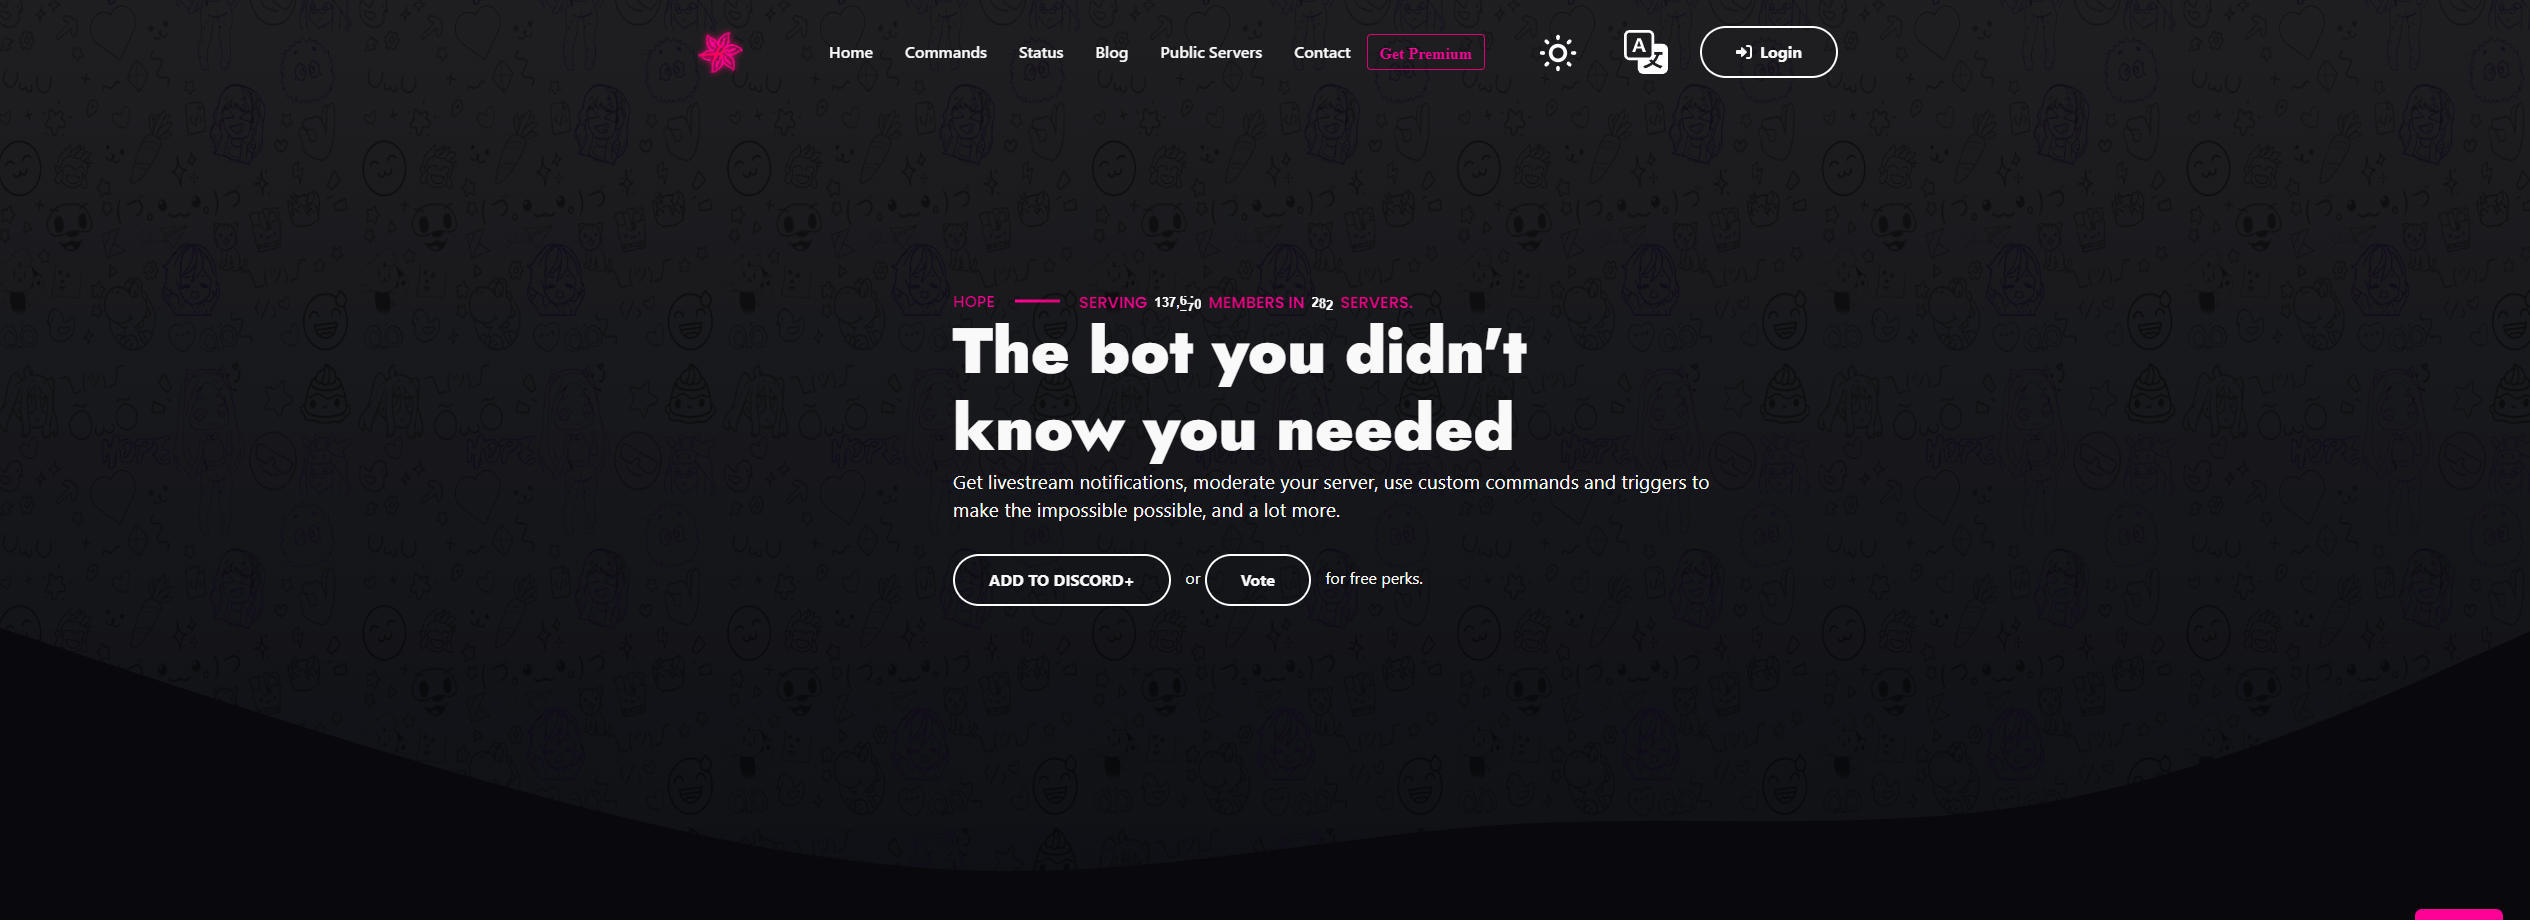 FindBots Homepage Preview